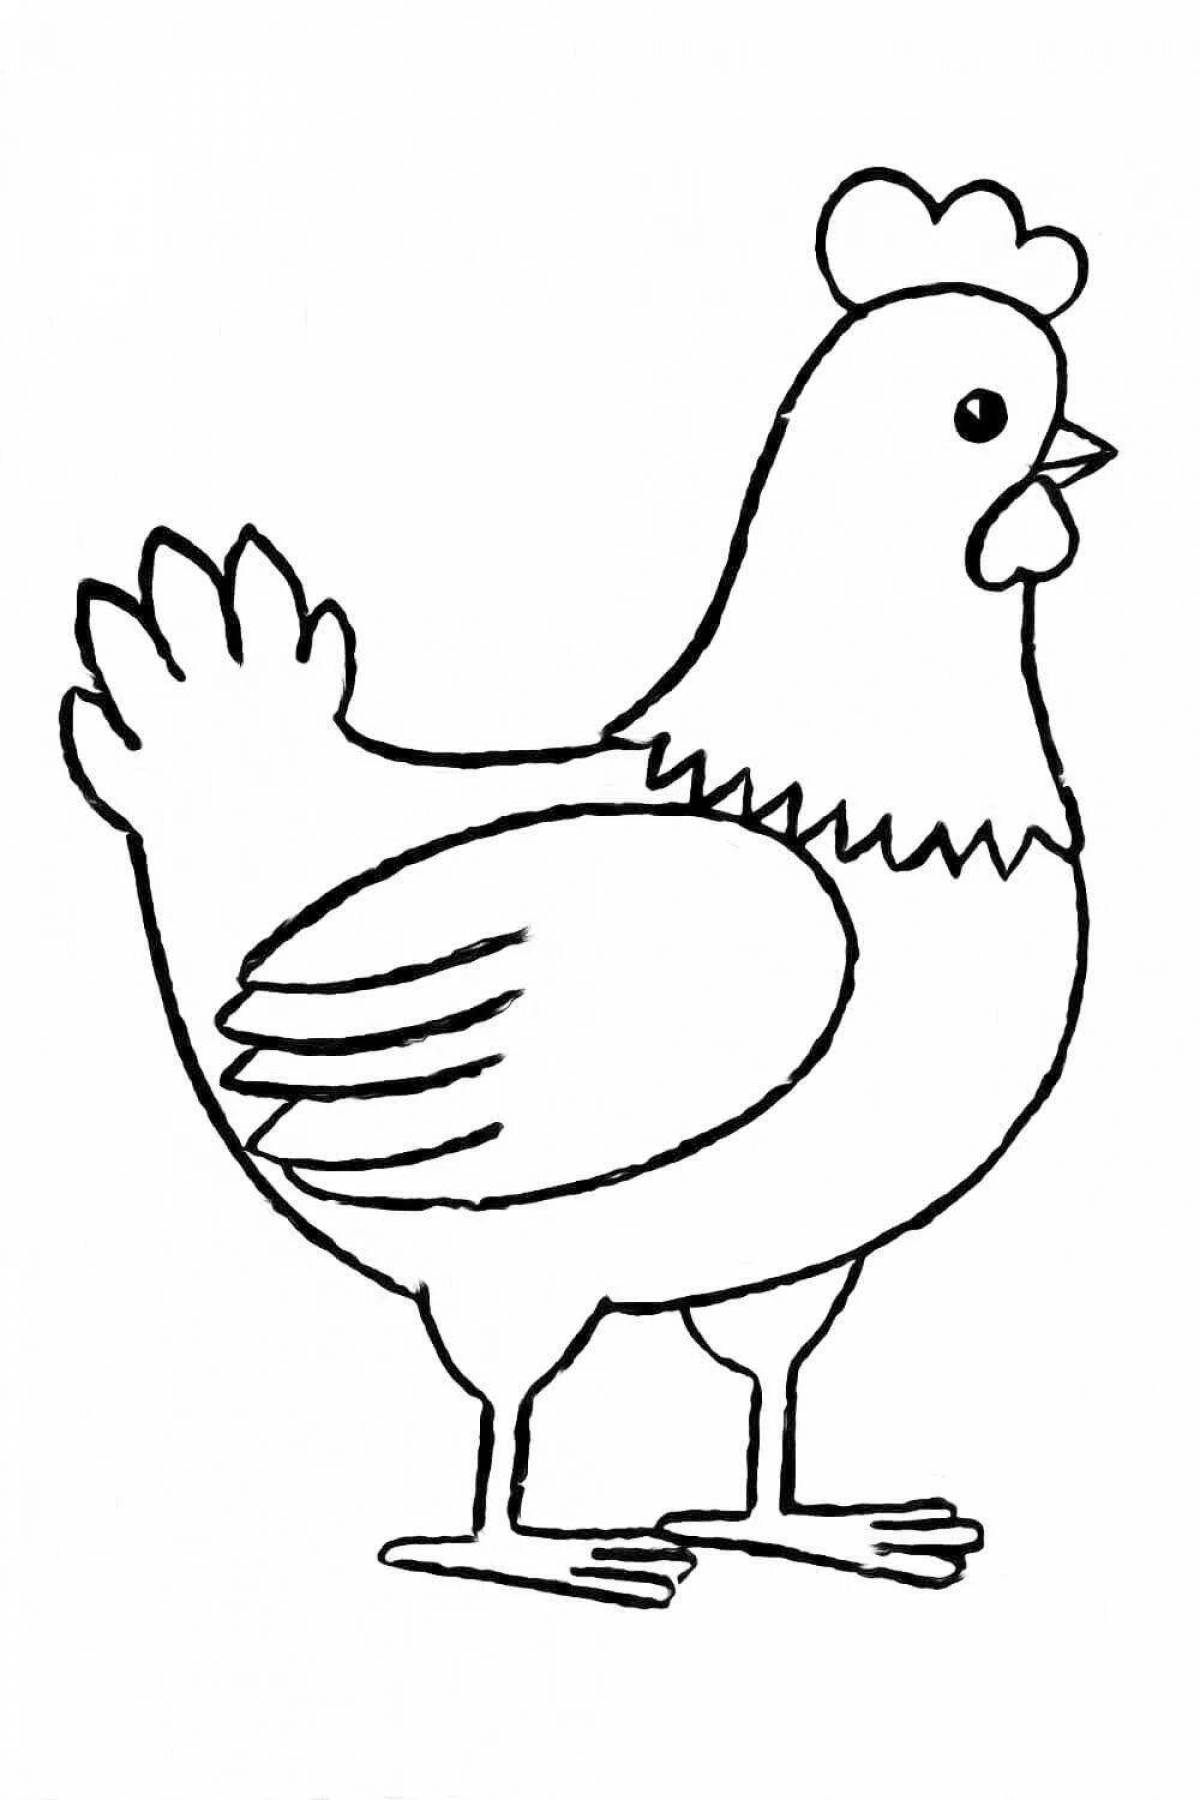 Bright chicken coloring book for kids